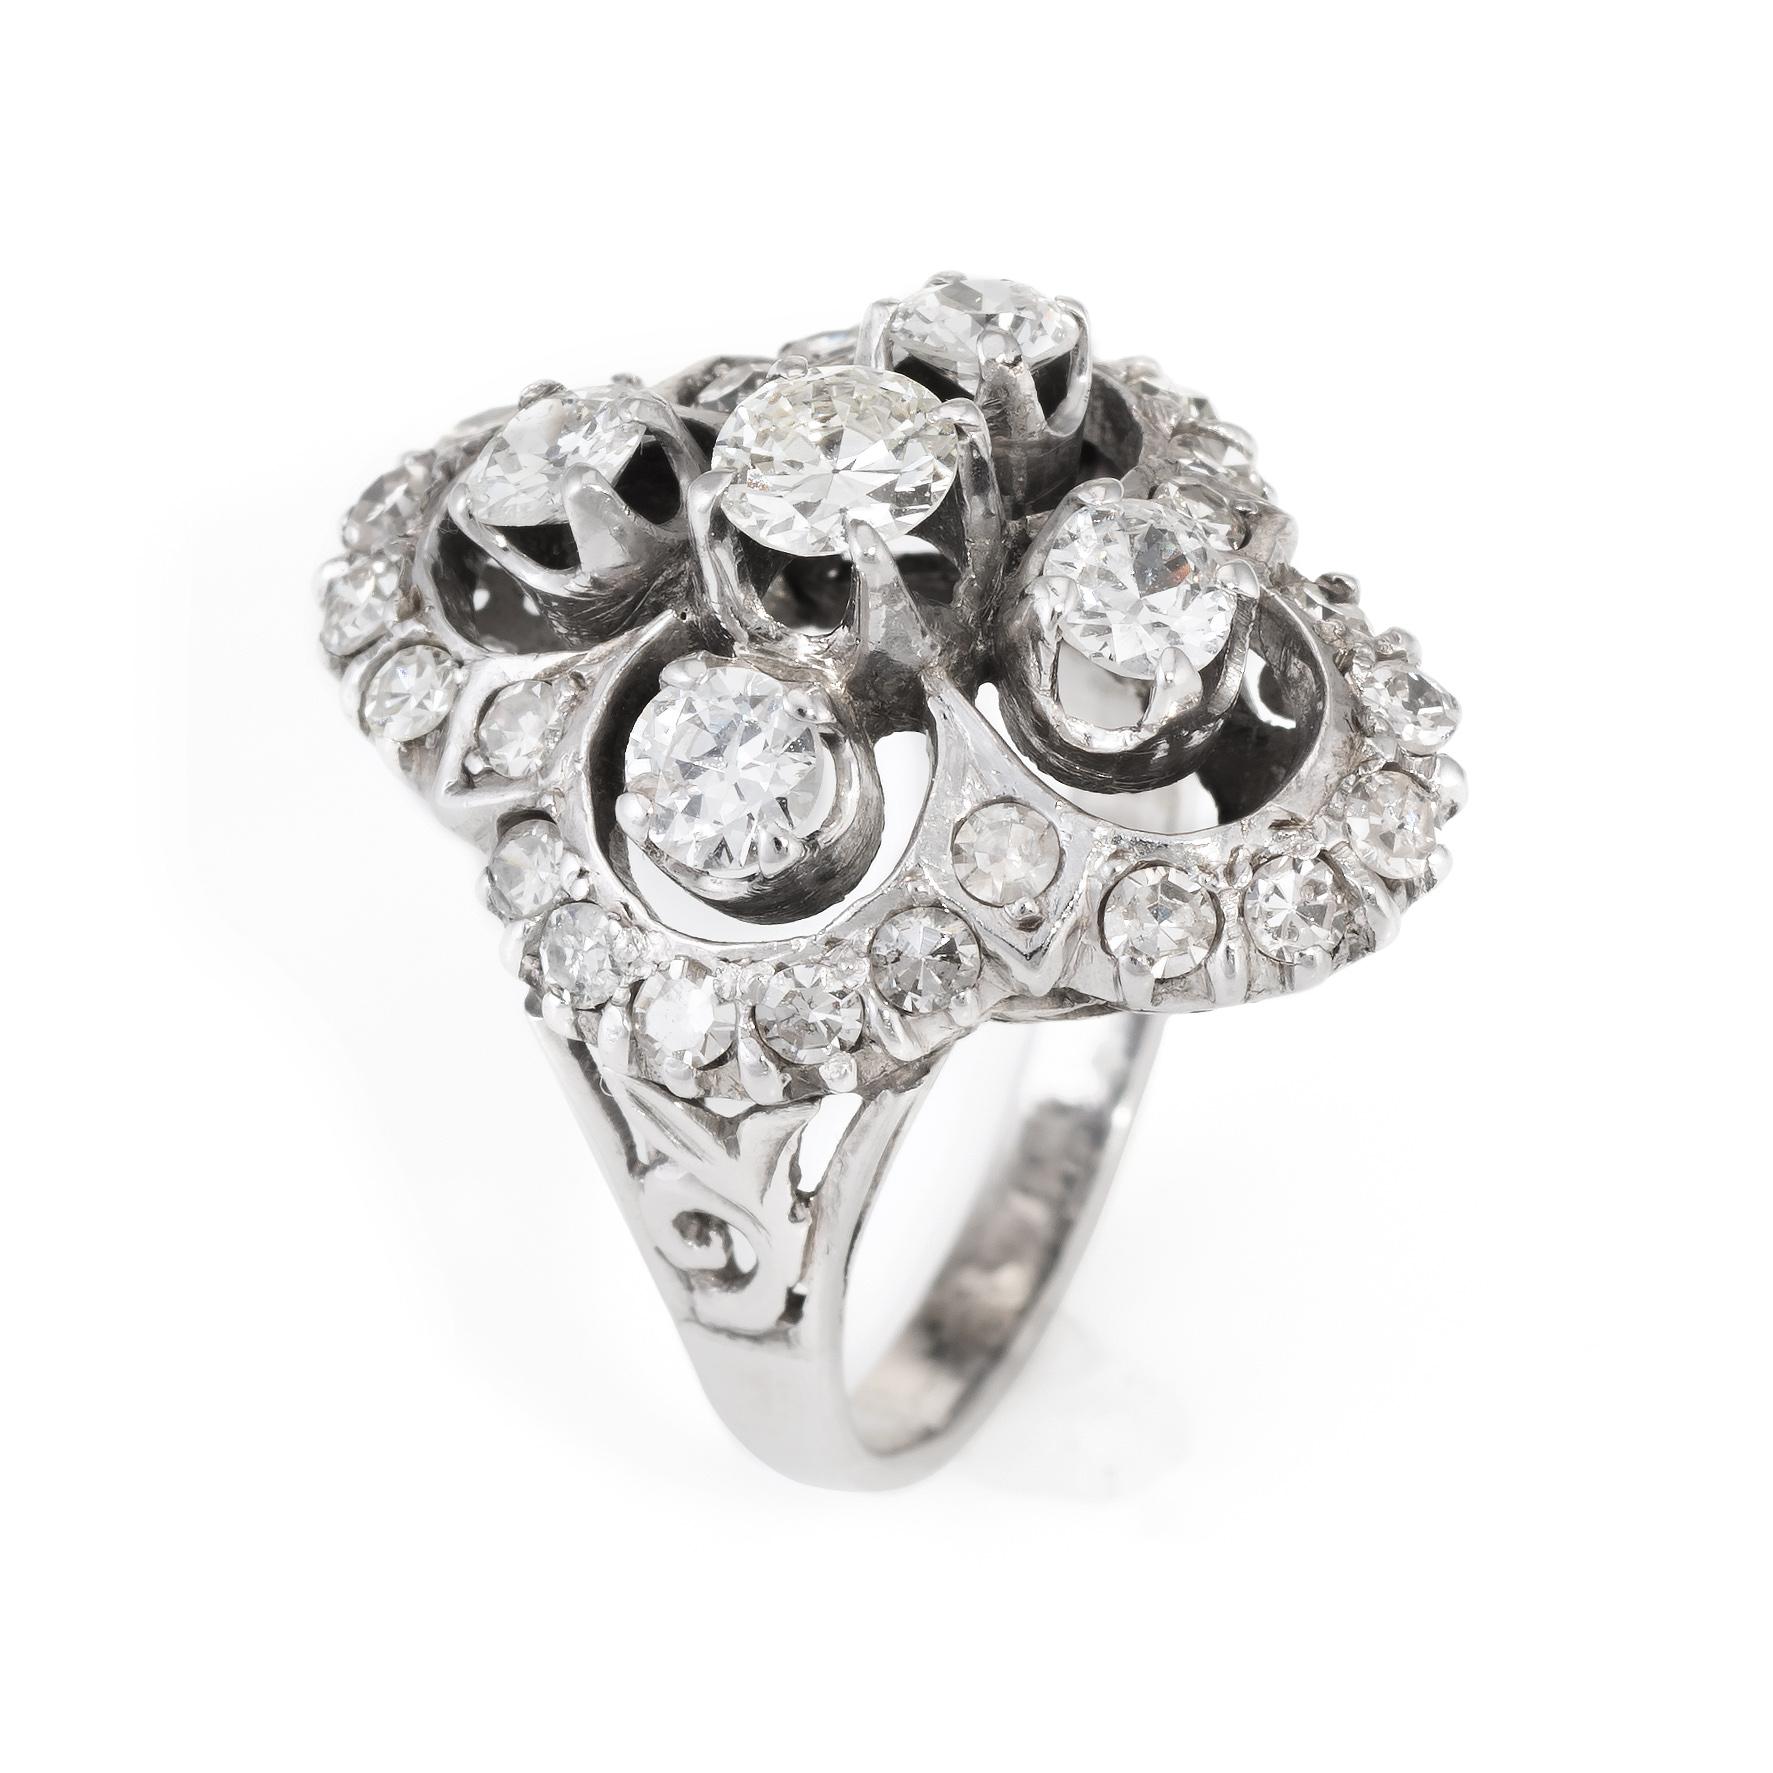 Finely detailed vintage cocktail ring (circa 1950s to 1960s), crafted in 14 karat white gold. 

4-prong set round brilliant cut diamonds, measuring 4.41 - 4.38 - 2.45mm (depth est) approximate weight 0.30ct. Graded in setting. Clarity SI-1. Color: